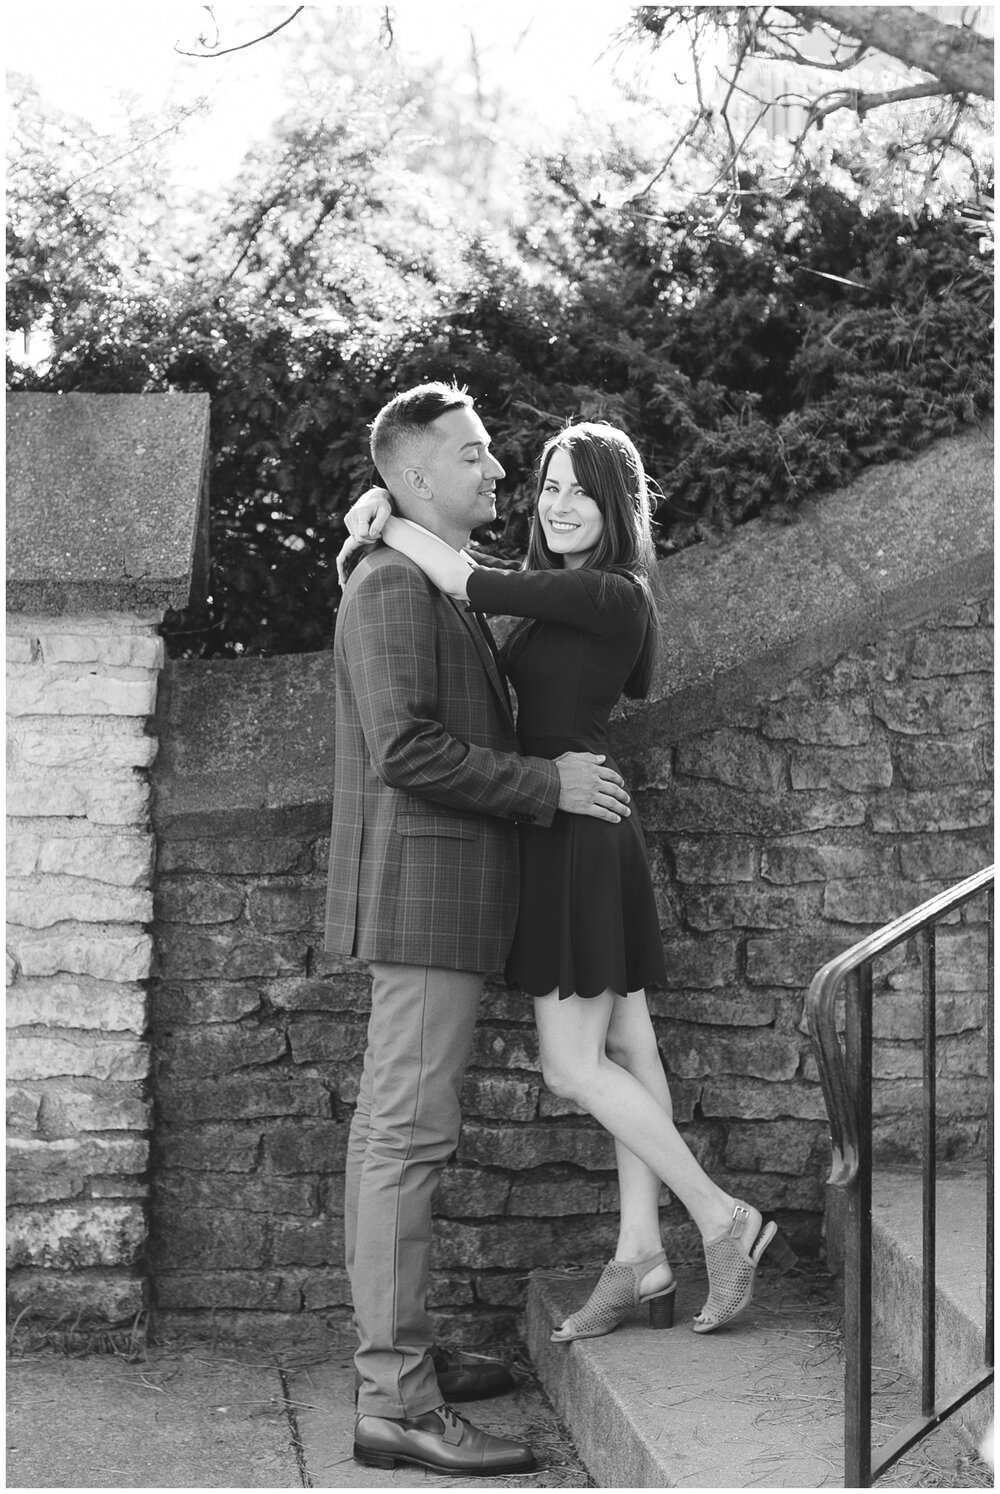 Naperville_Engagement_Kat_and_Zach_bw-10.jpg